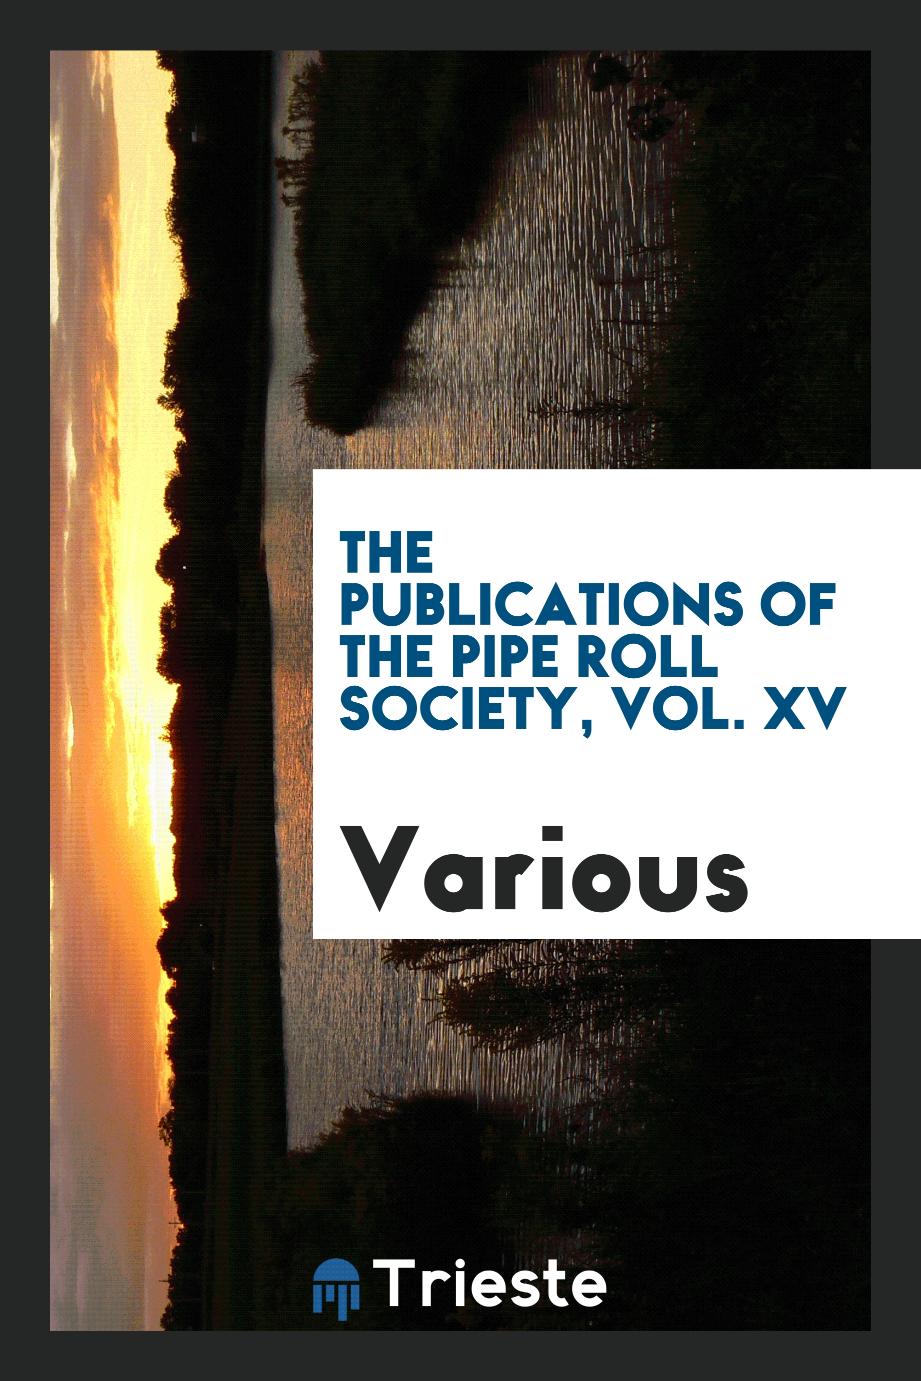 The Publications of the Pipe Roll Society, Vol. XV